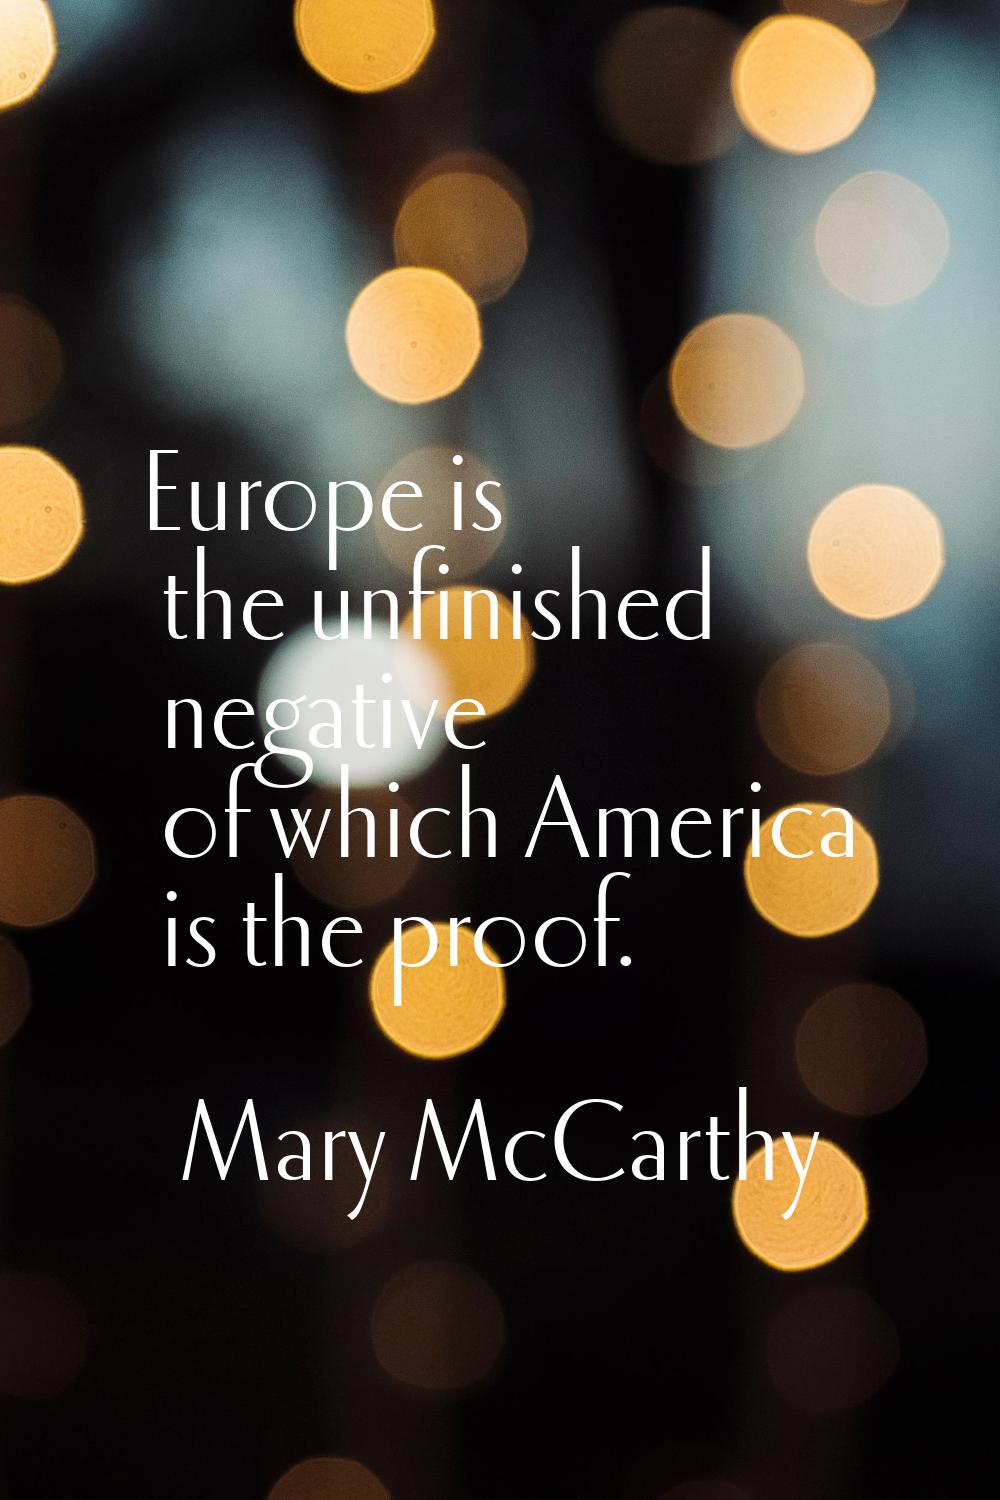 Europe is the unfinished negative of which America is the proof.